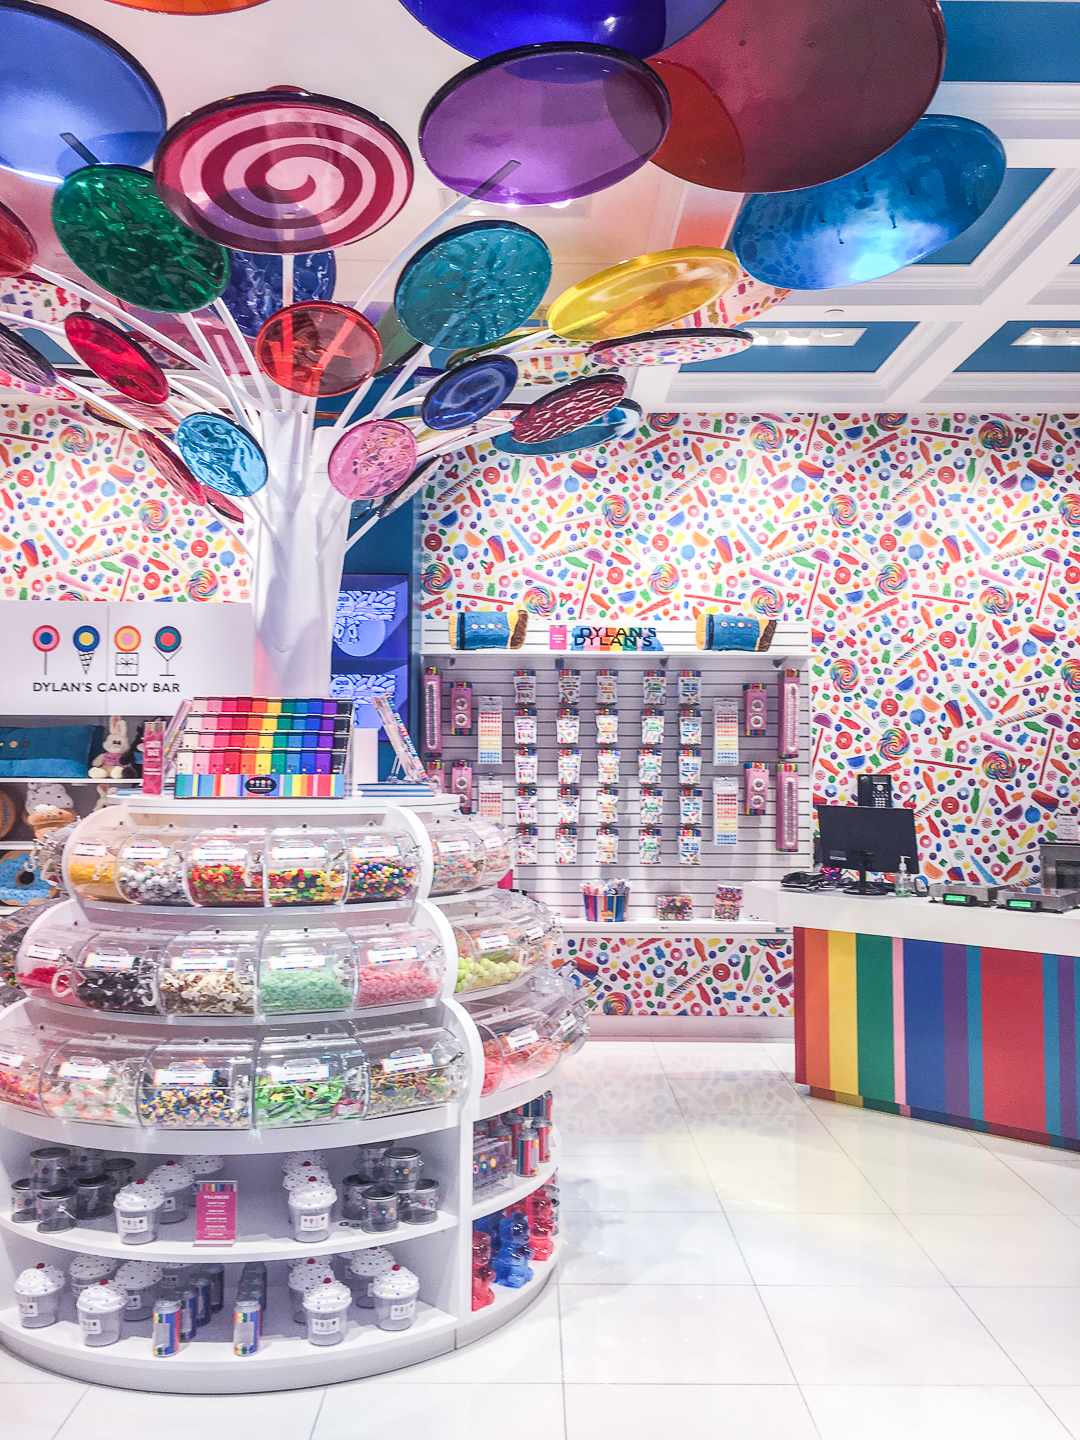 dylan's candy bar in chicago illinois